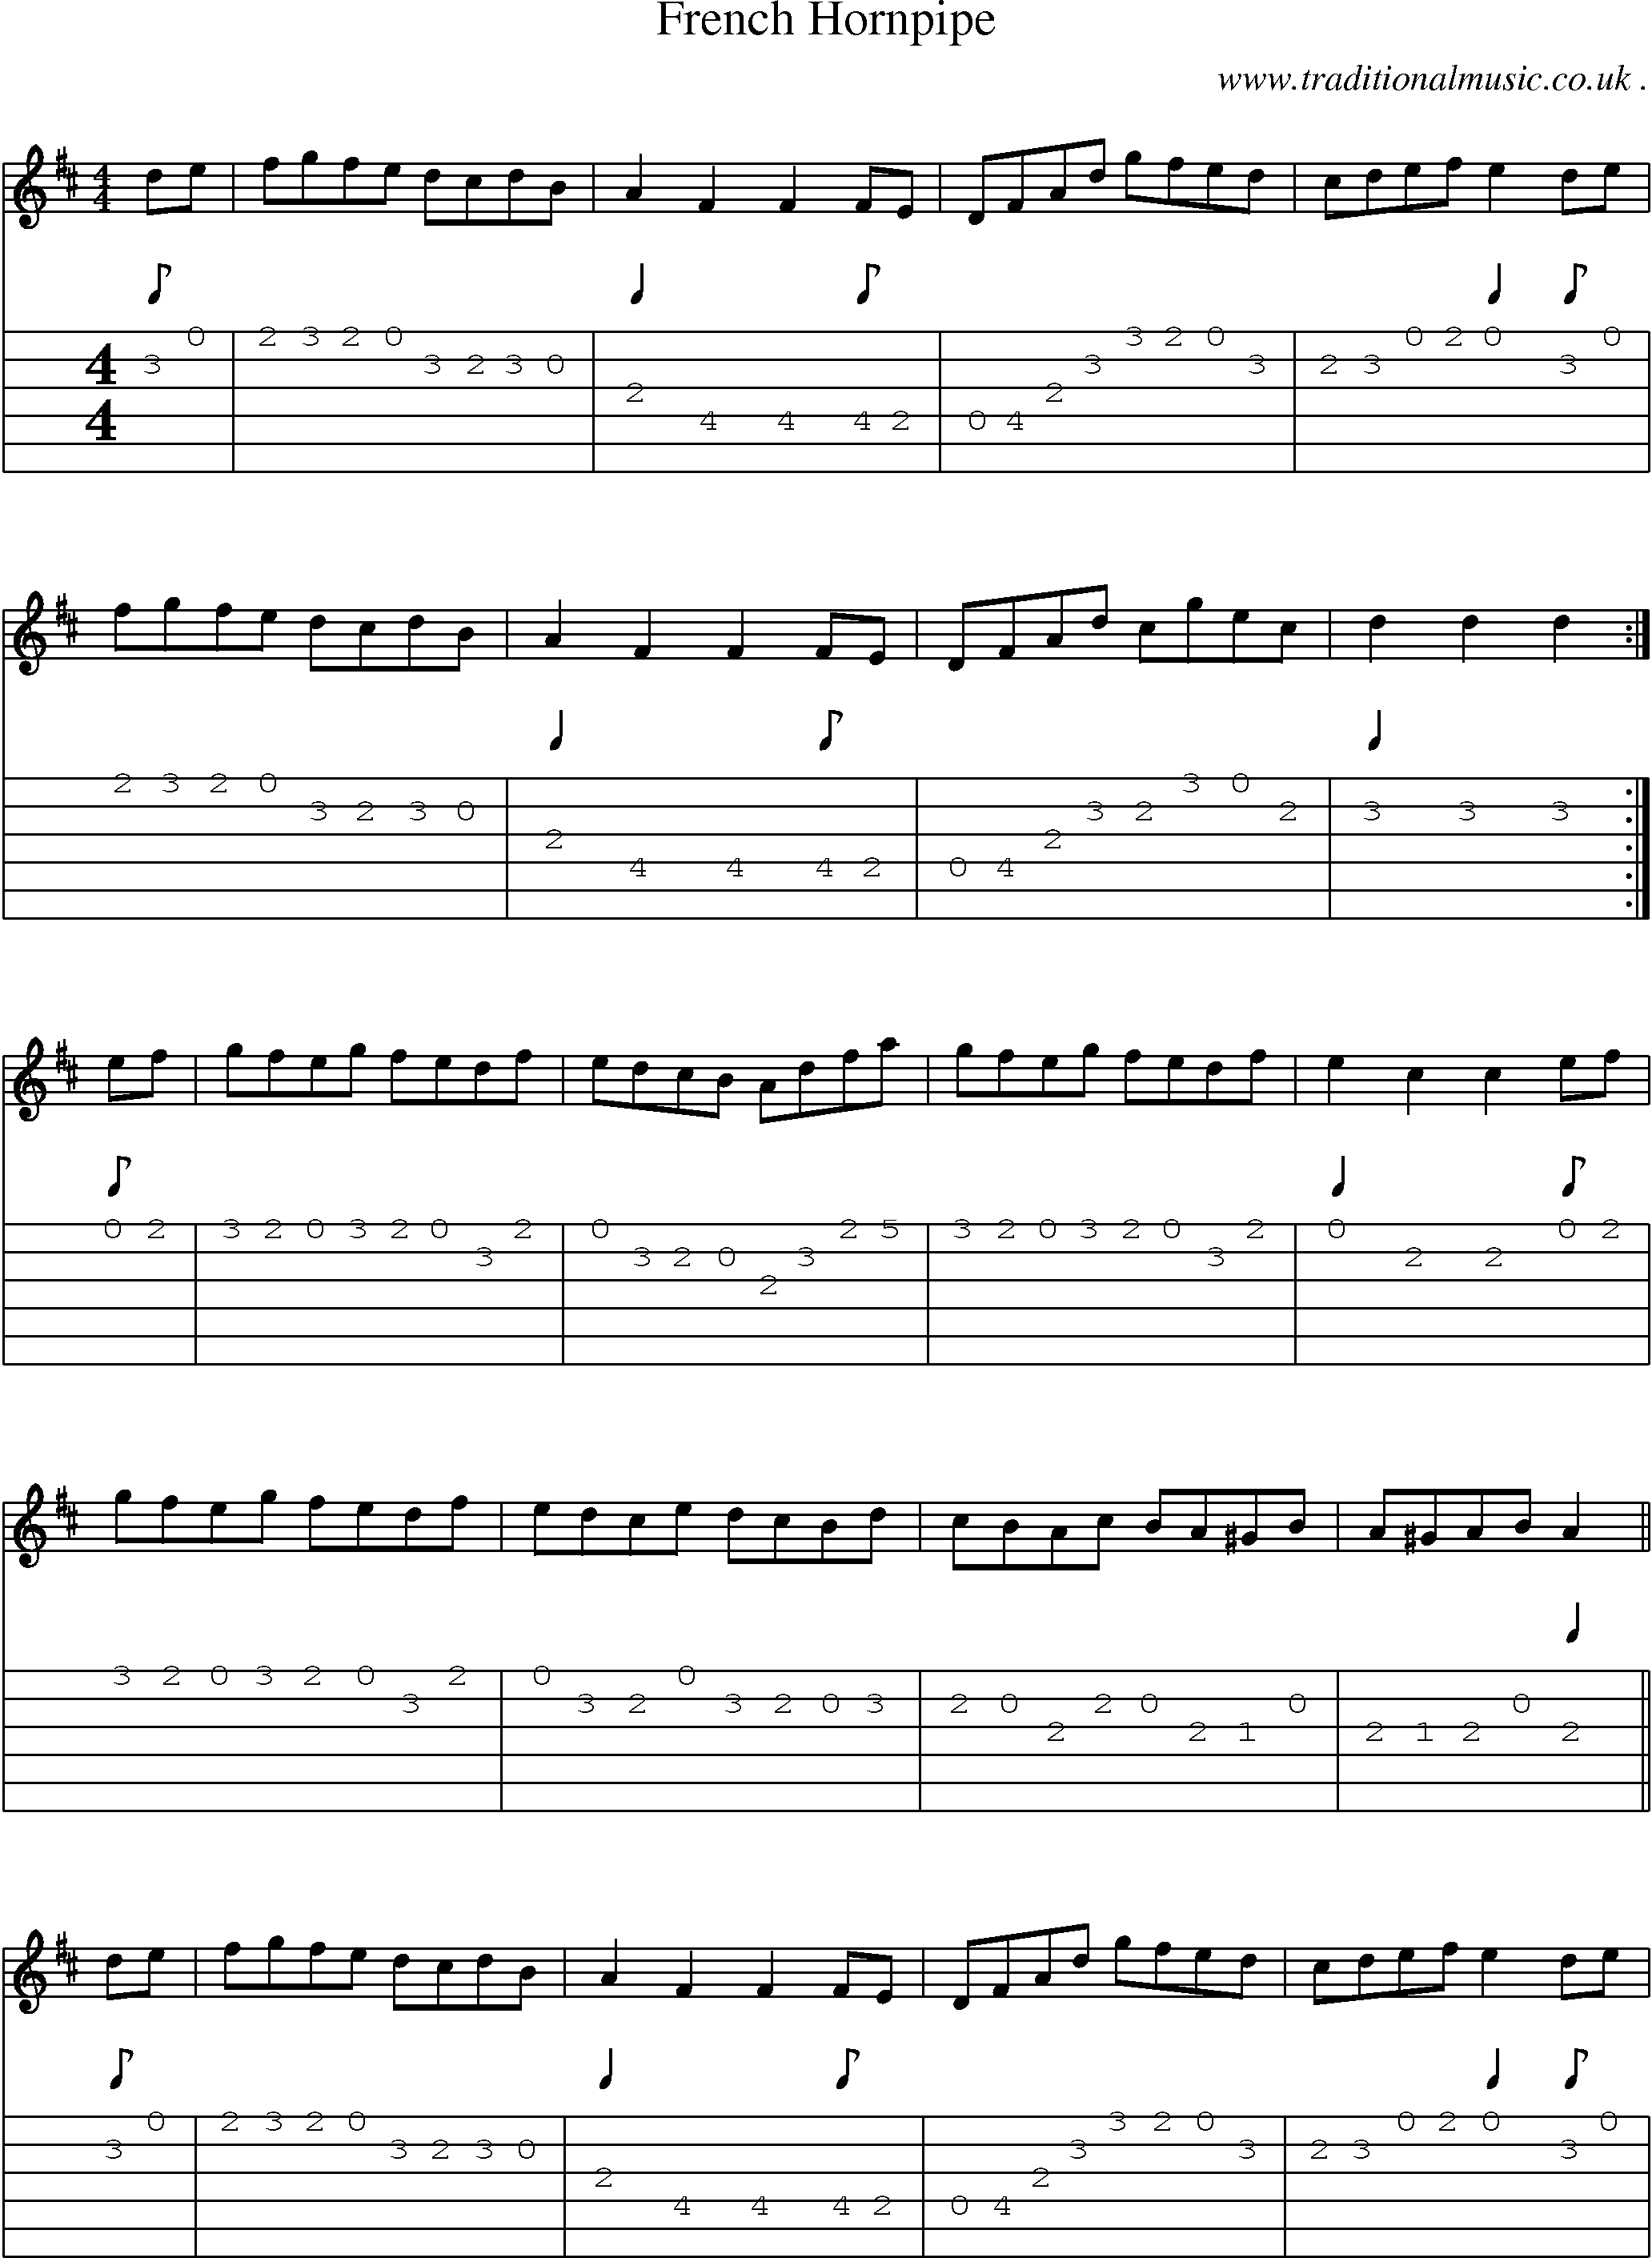 Sheet-Music and Guitar Tabs for French Hornpipe